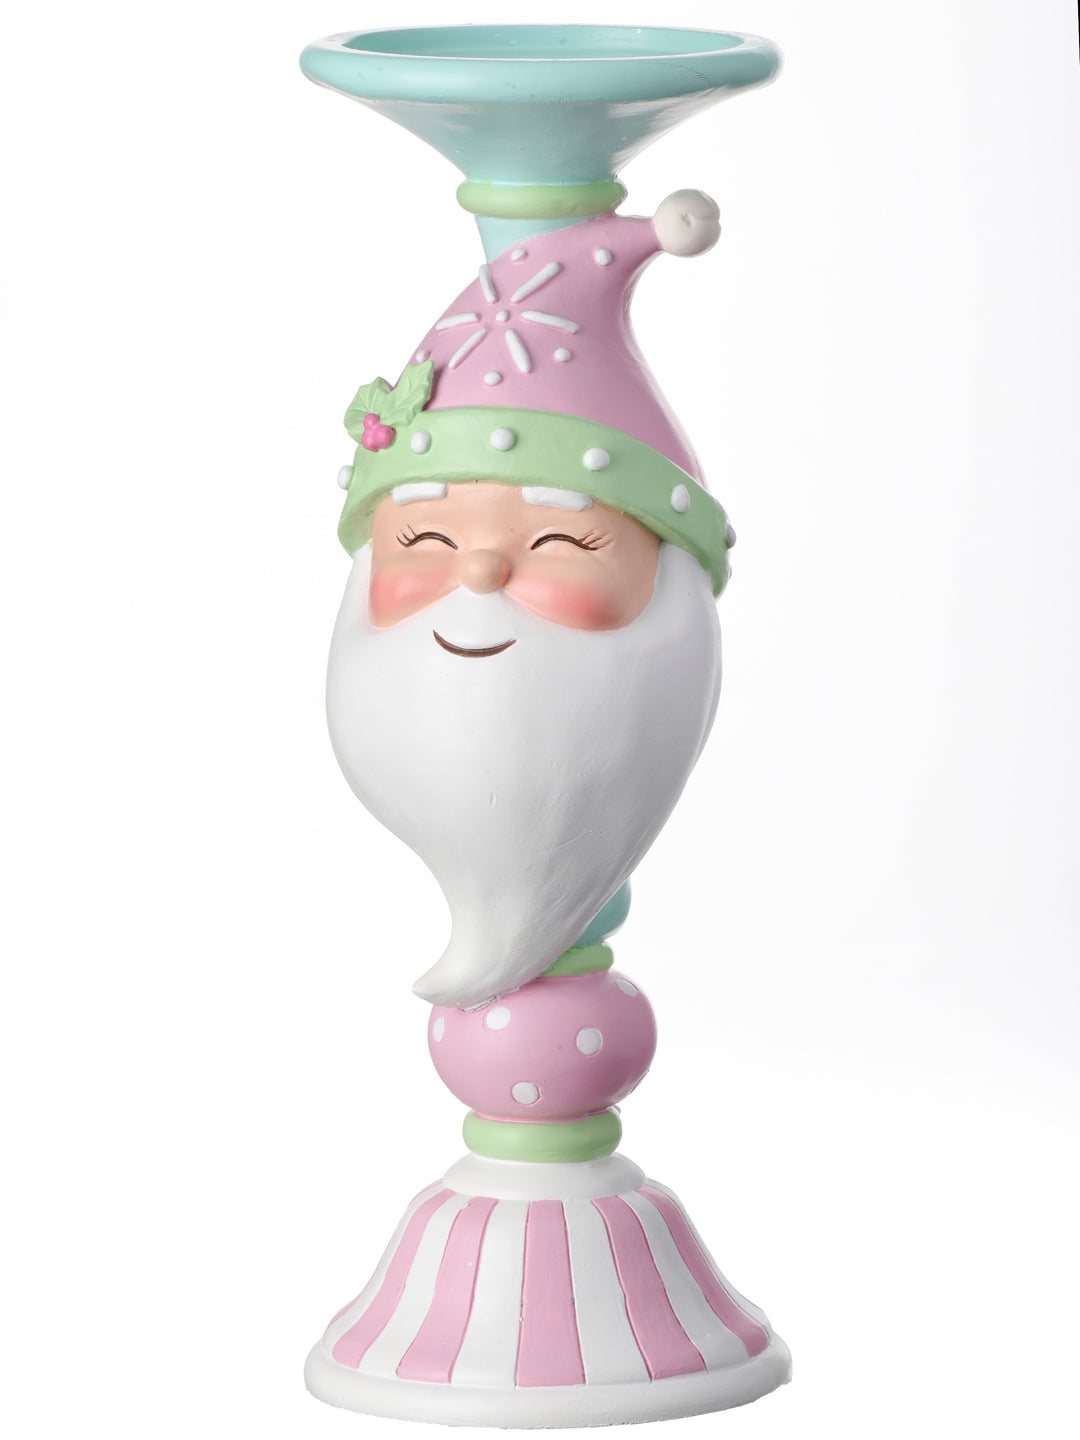 Regency 12" Resin Candy Santa Candle Stand in Pink/Mint Green